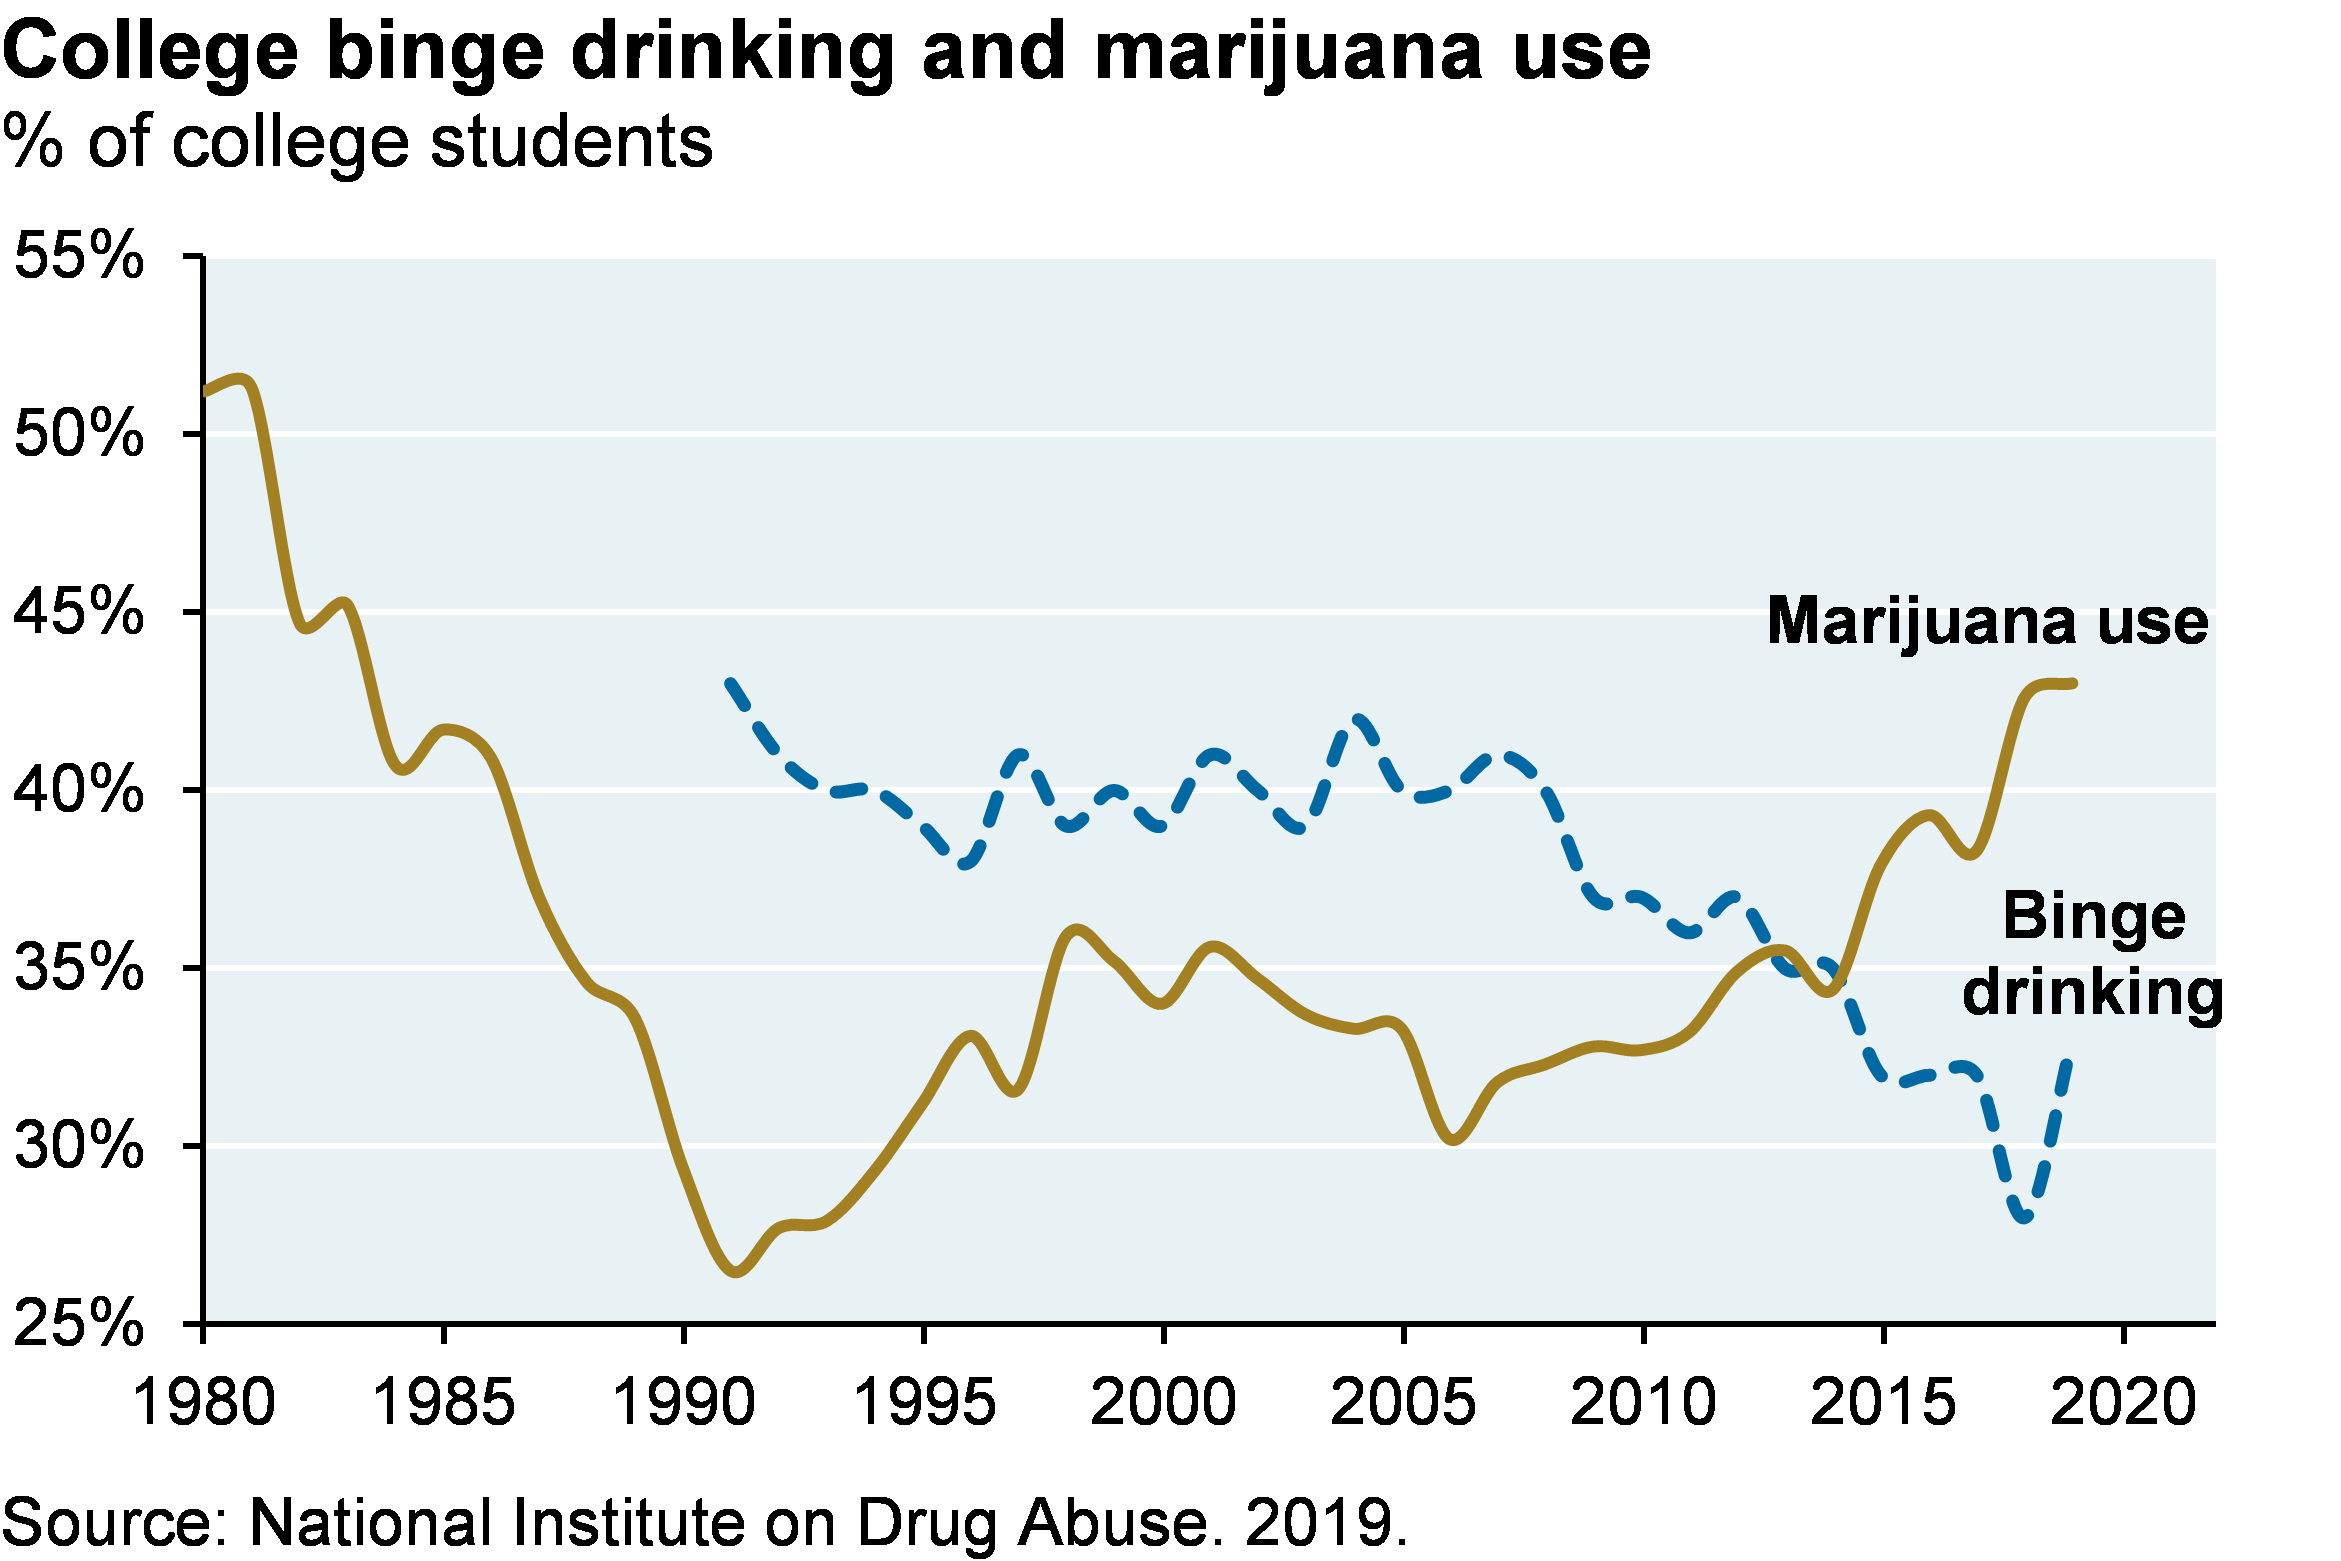 Line chart shows college binge drinking and marijuana use since 1980. The chart shows that marijuana use has steadily increased from its early 1990s level of around 27% of college students to its most recent level of around 43%. Binge drinking has steadily declined from its 1990 level of around 43% to its most recent level of around 33%.